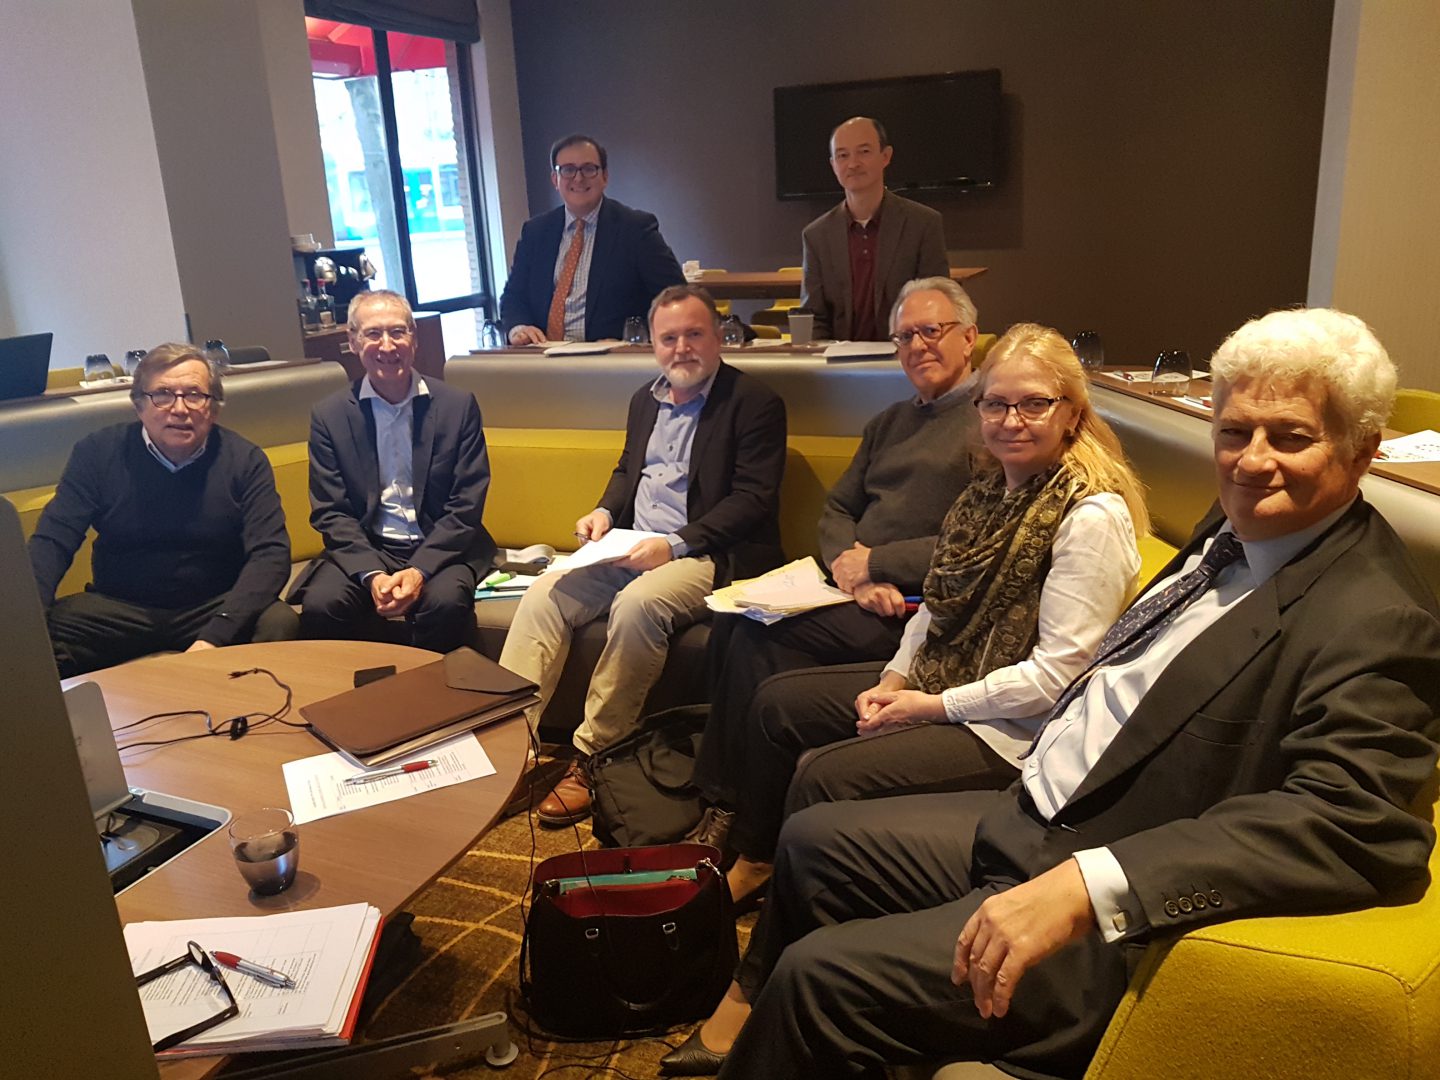 January 17-18 at the University of Leiden, Amsterdam, took place a meeting on the development of the UN ECE Model Concessions Law   The Founder of the Academy Irina Zapatrina took part in the meeting as a member of the working group.